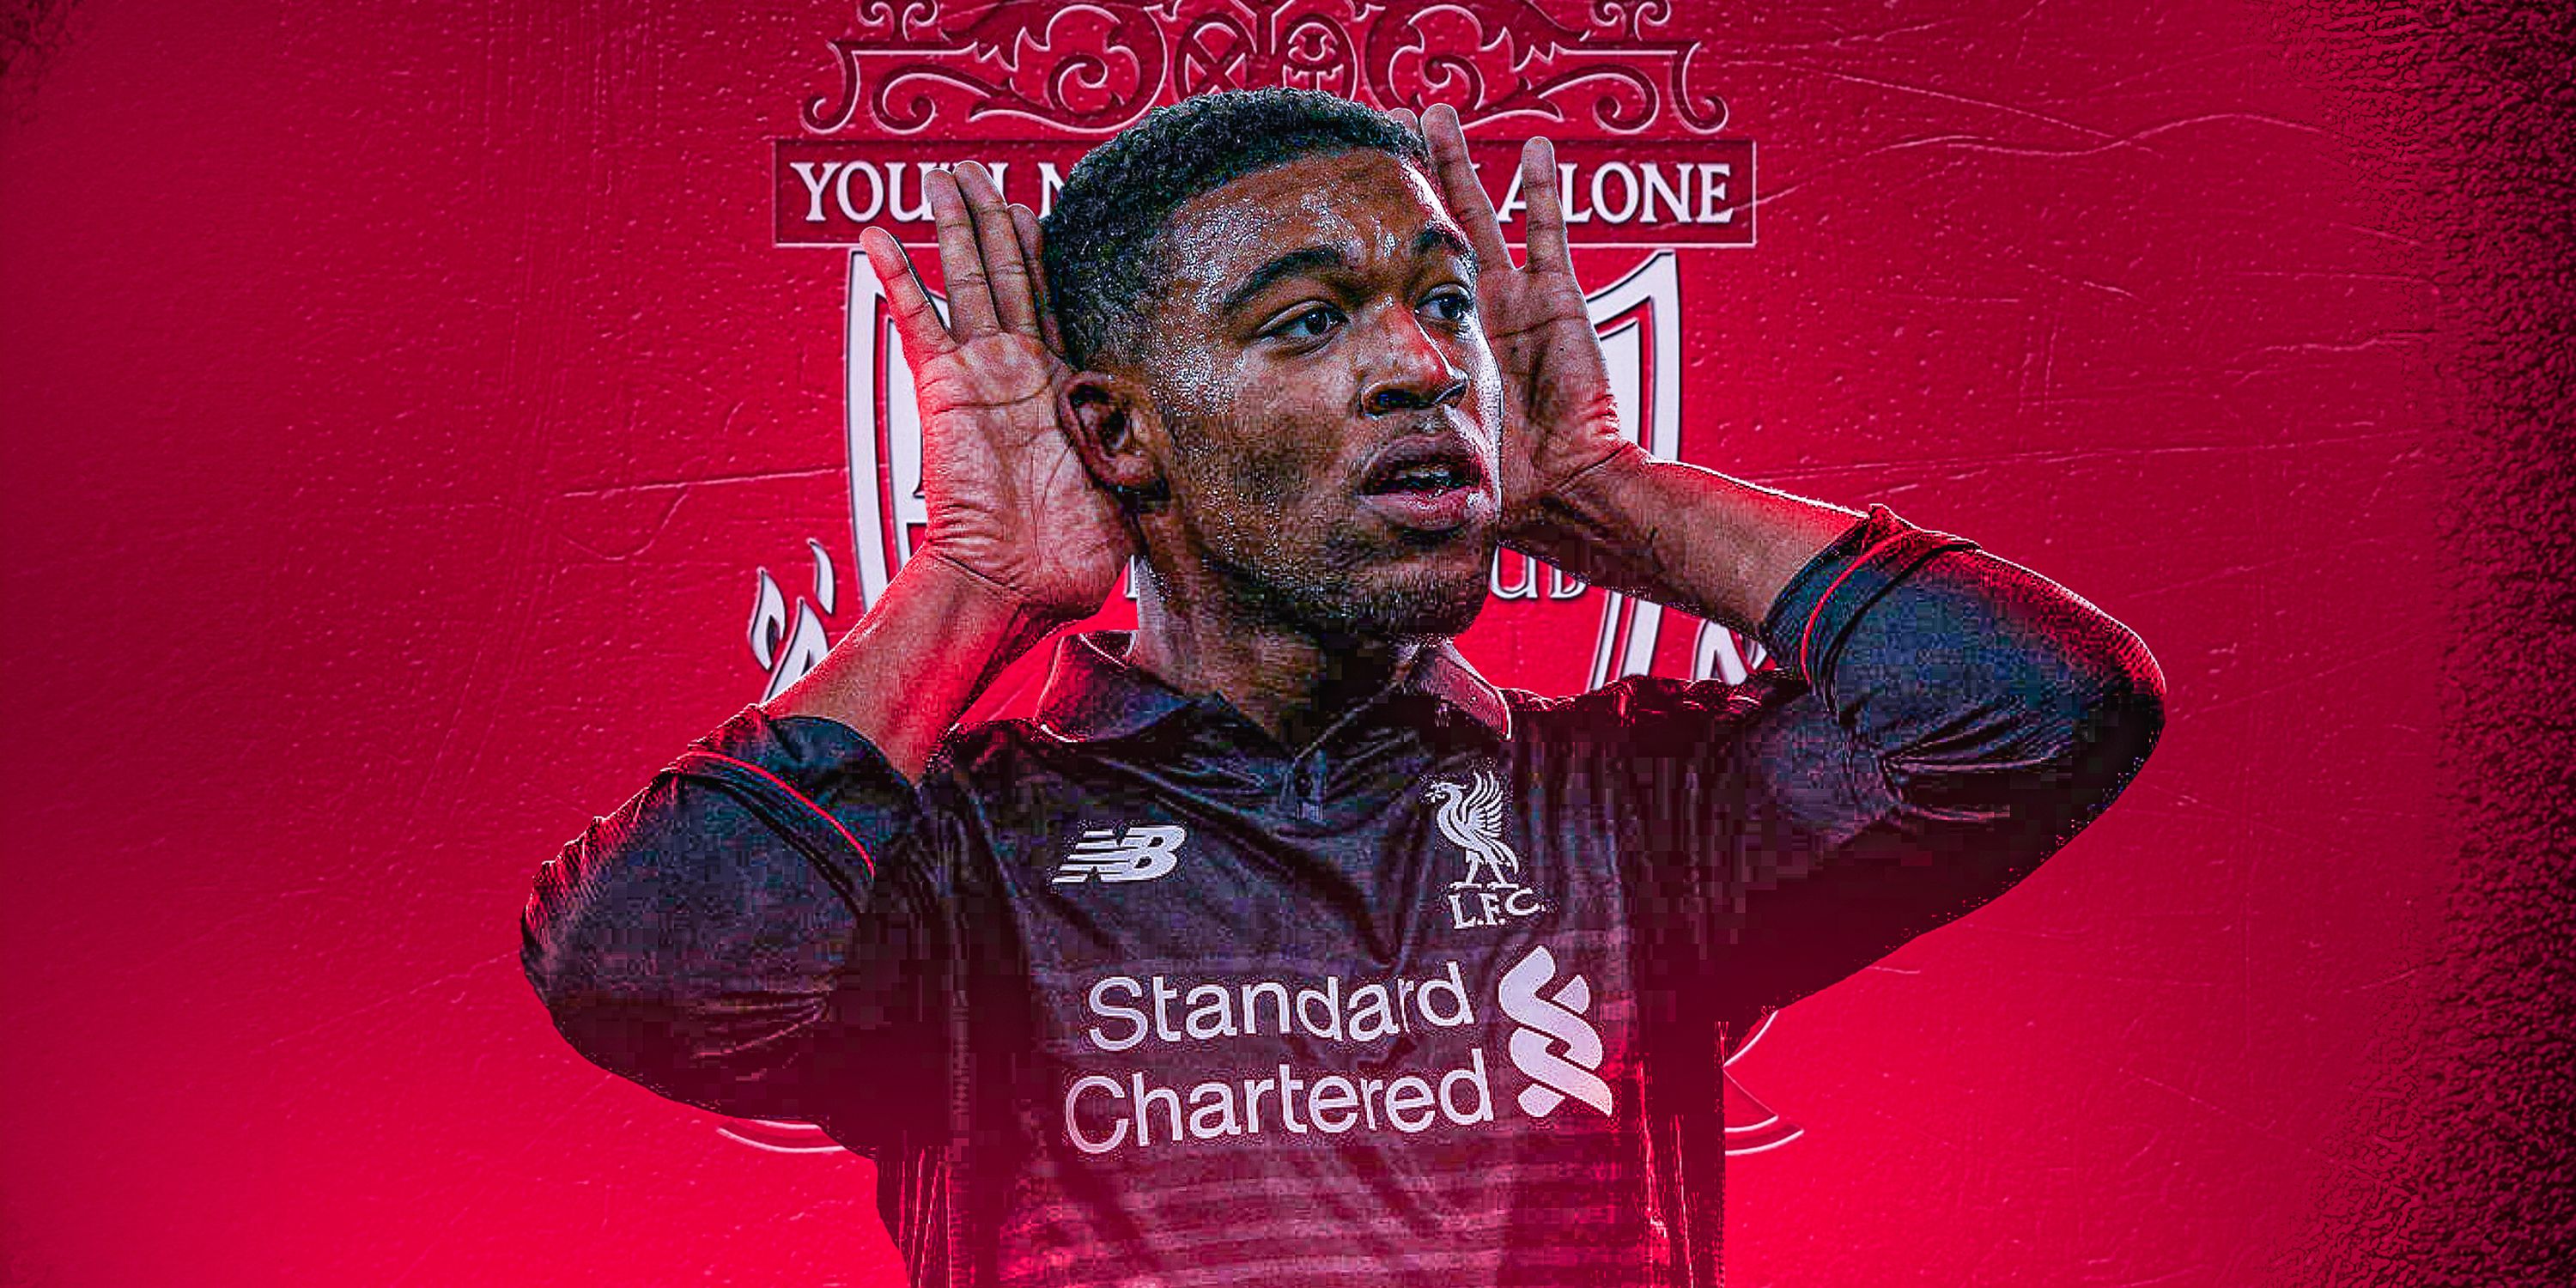 What happened to former Liverpool player Jordon Ibe